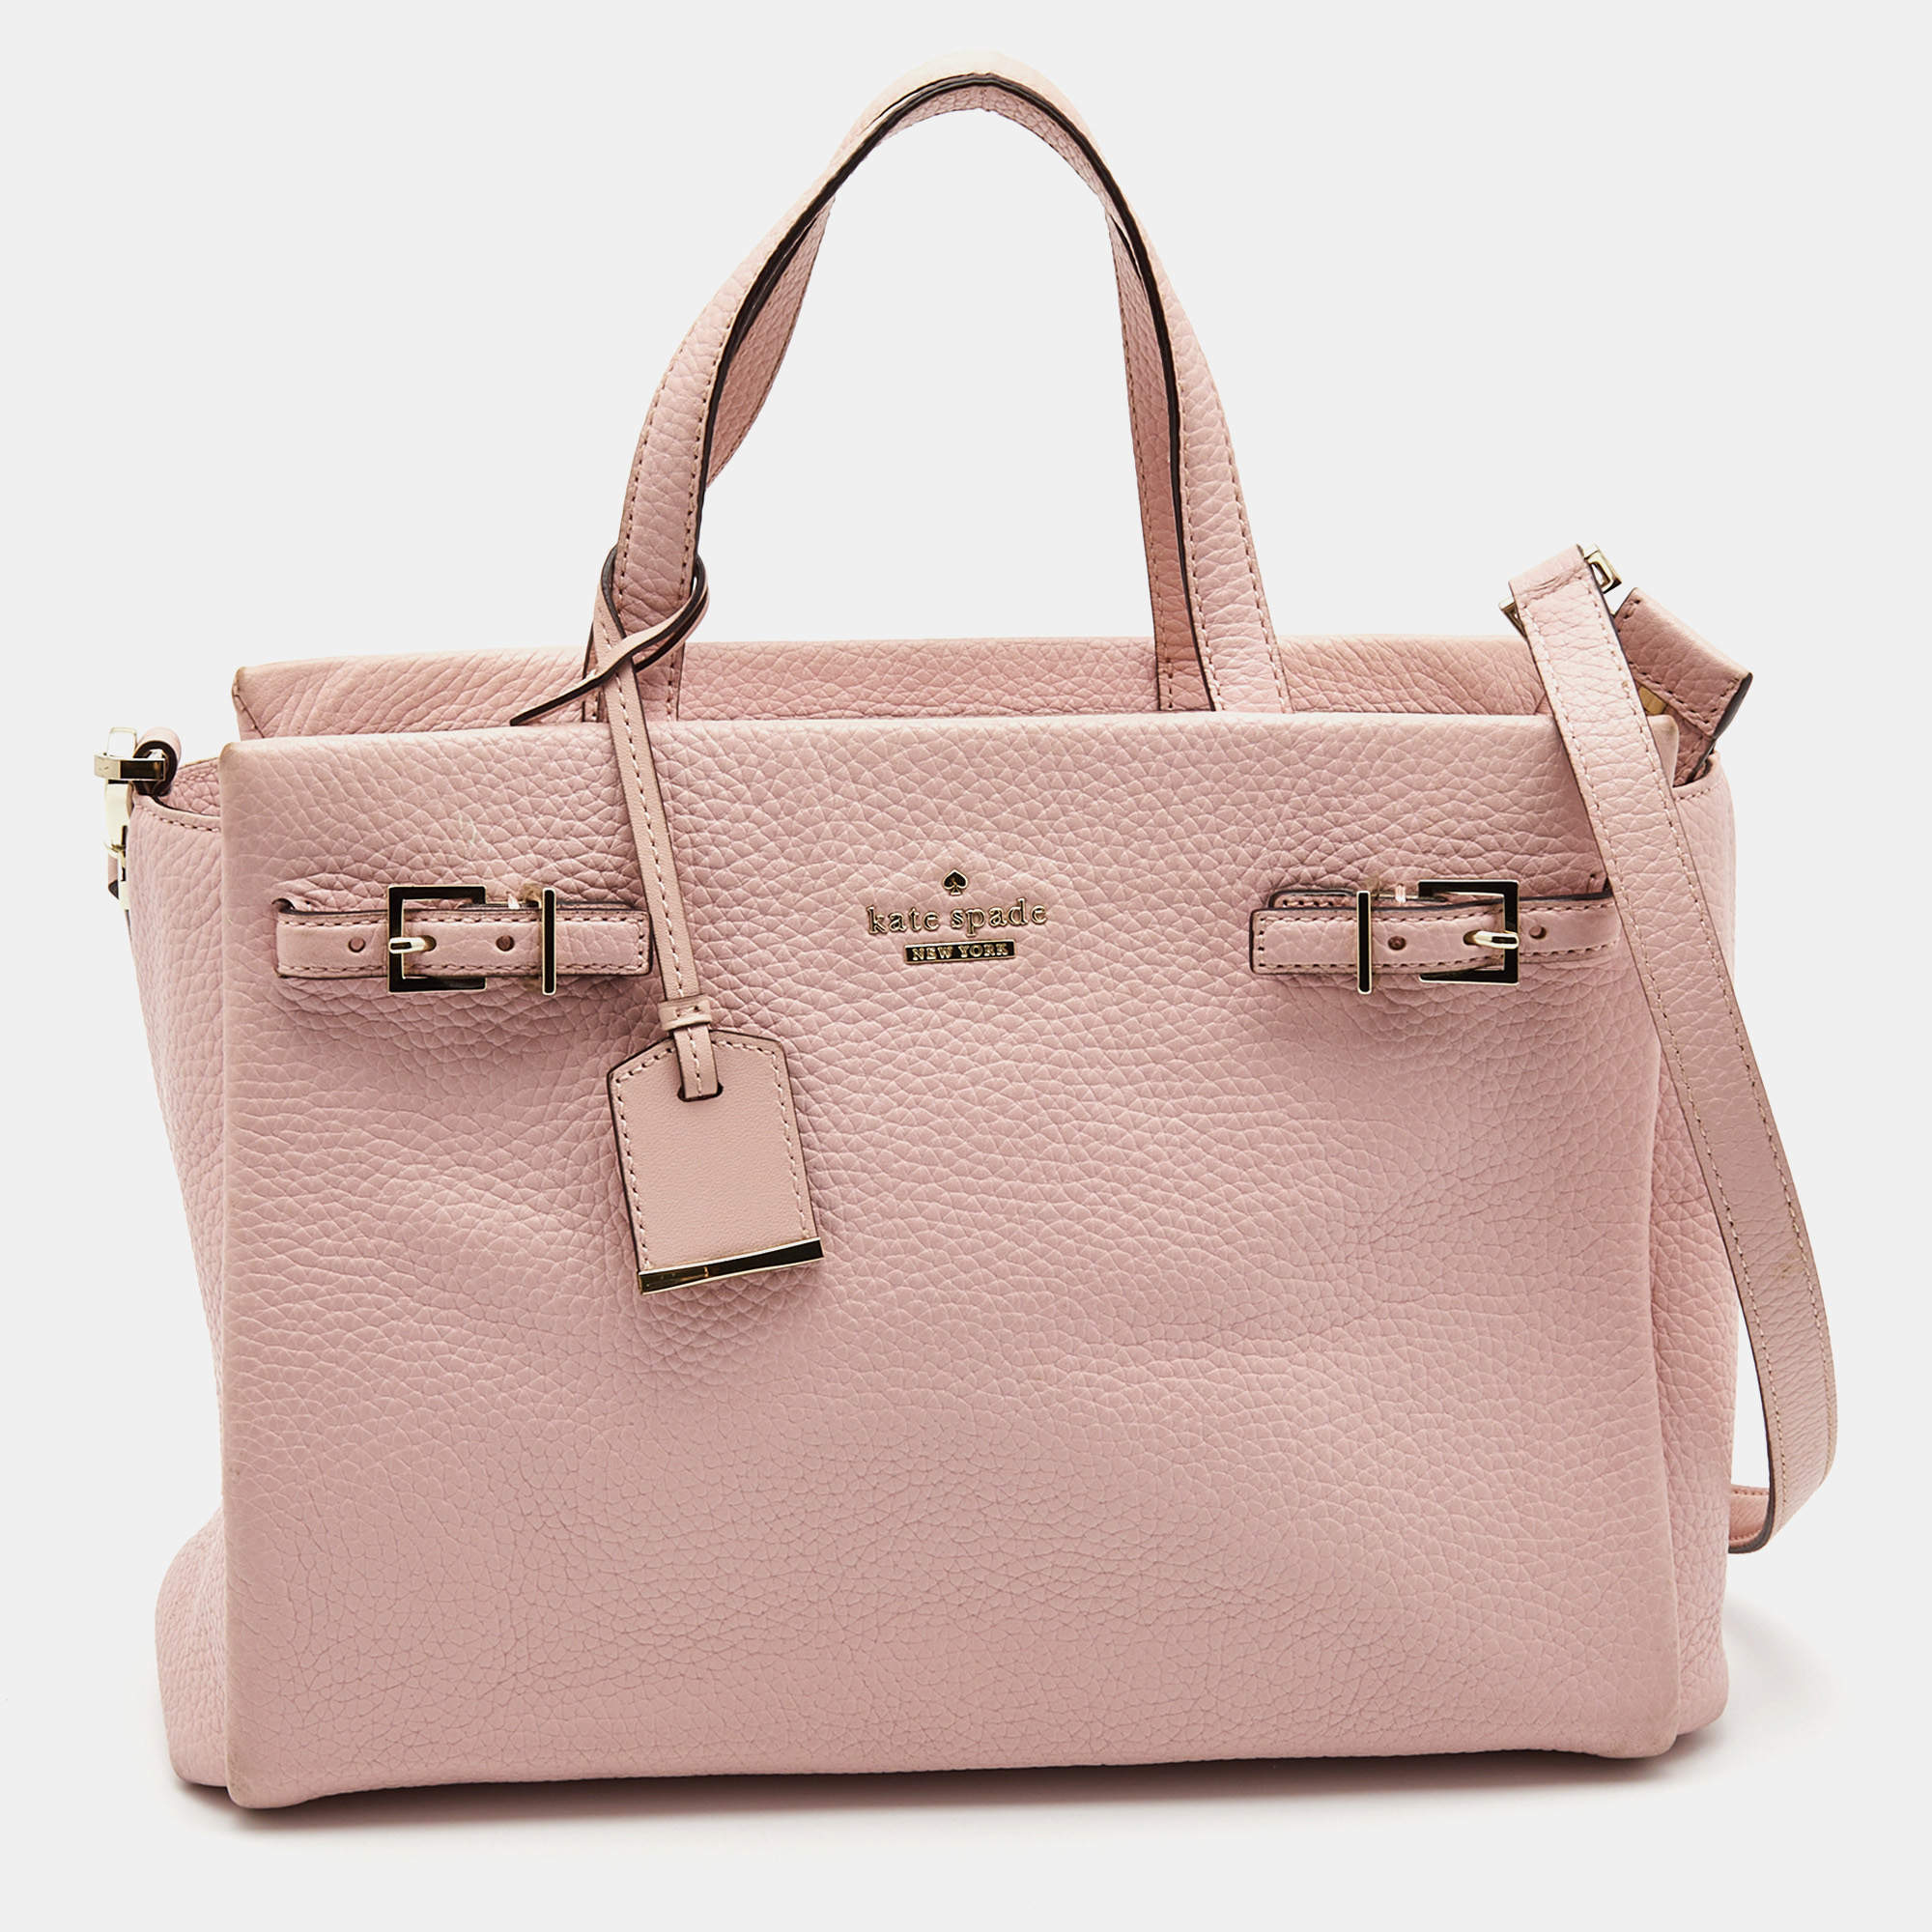 Kate Spade Pink/Red Saffiano Leather Cedar Street Hayden Tote Kate